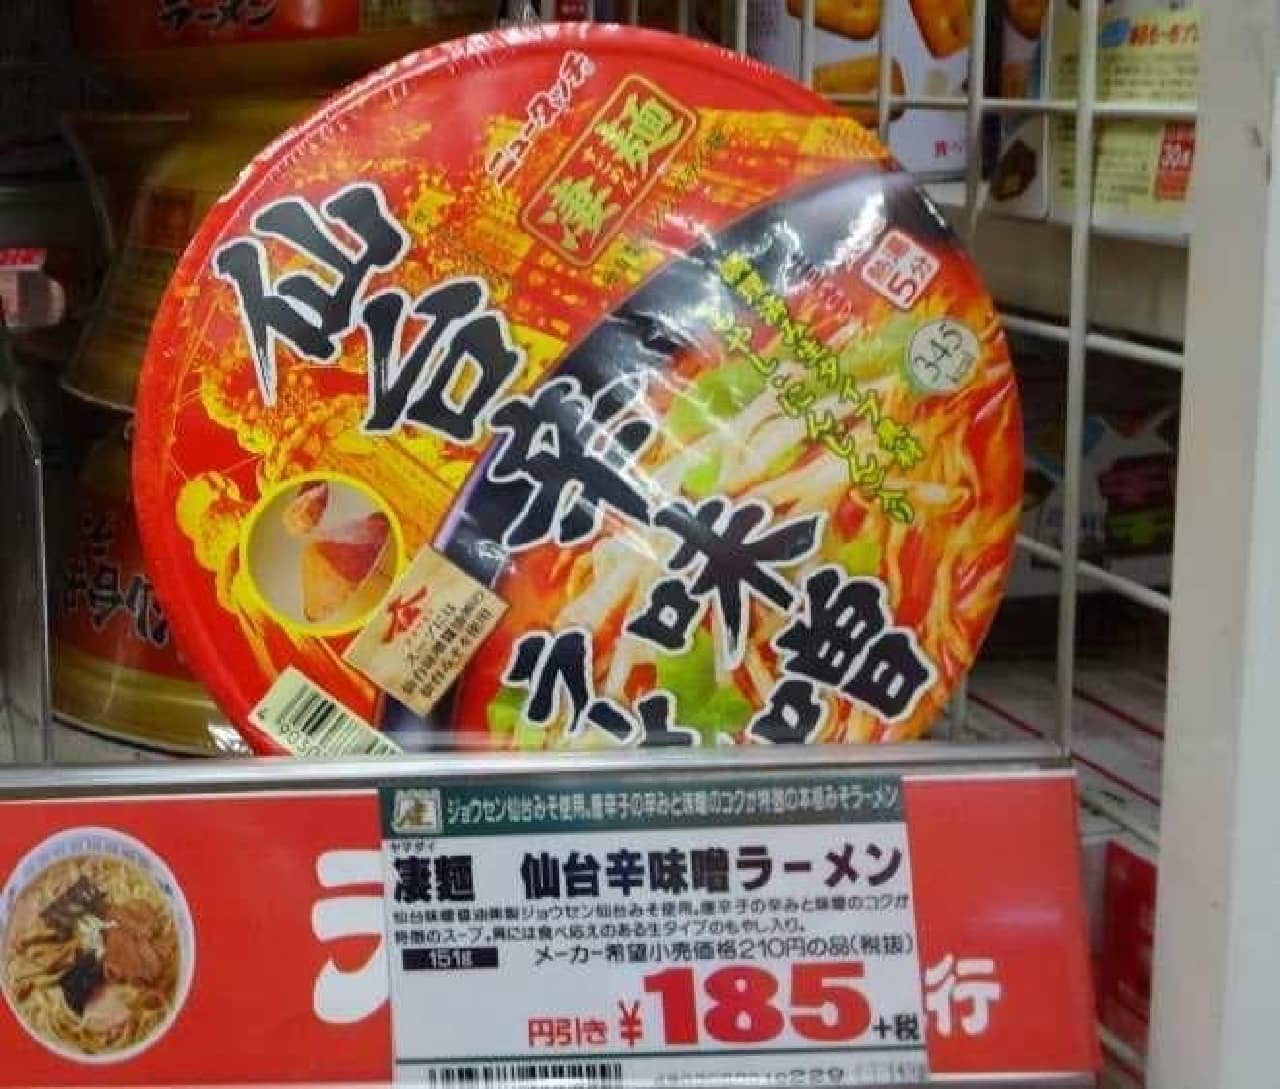 Maybe I really want to eat cold noodles ...?